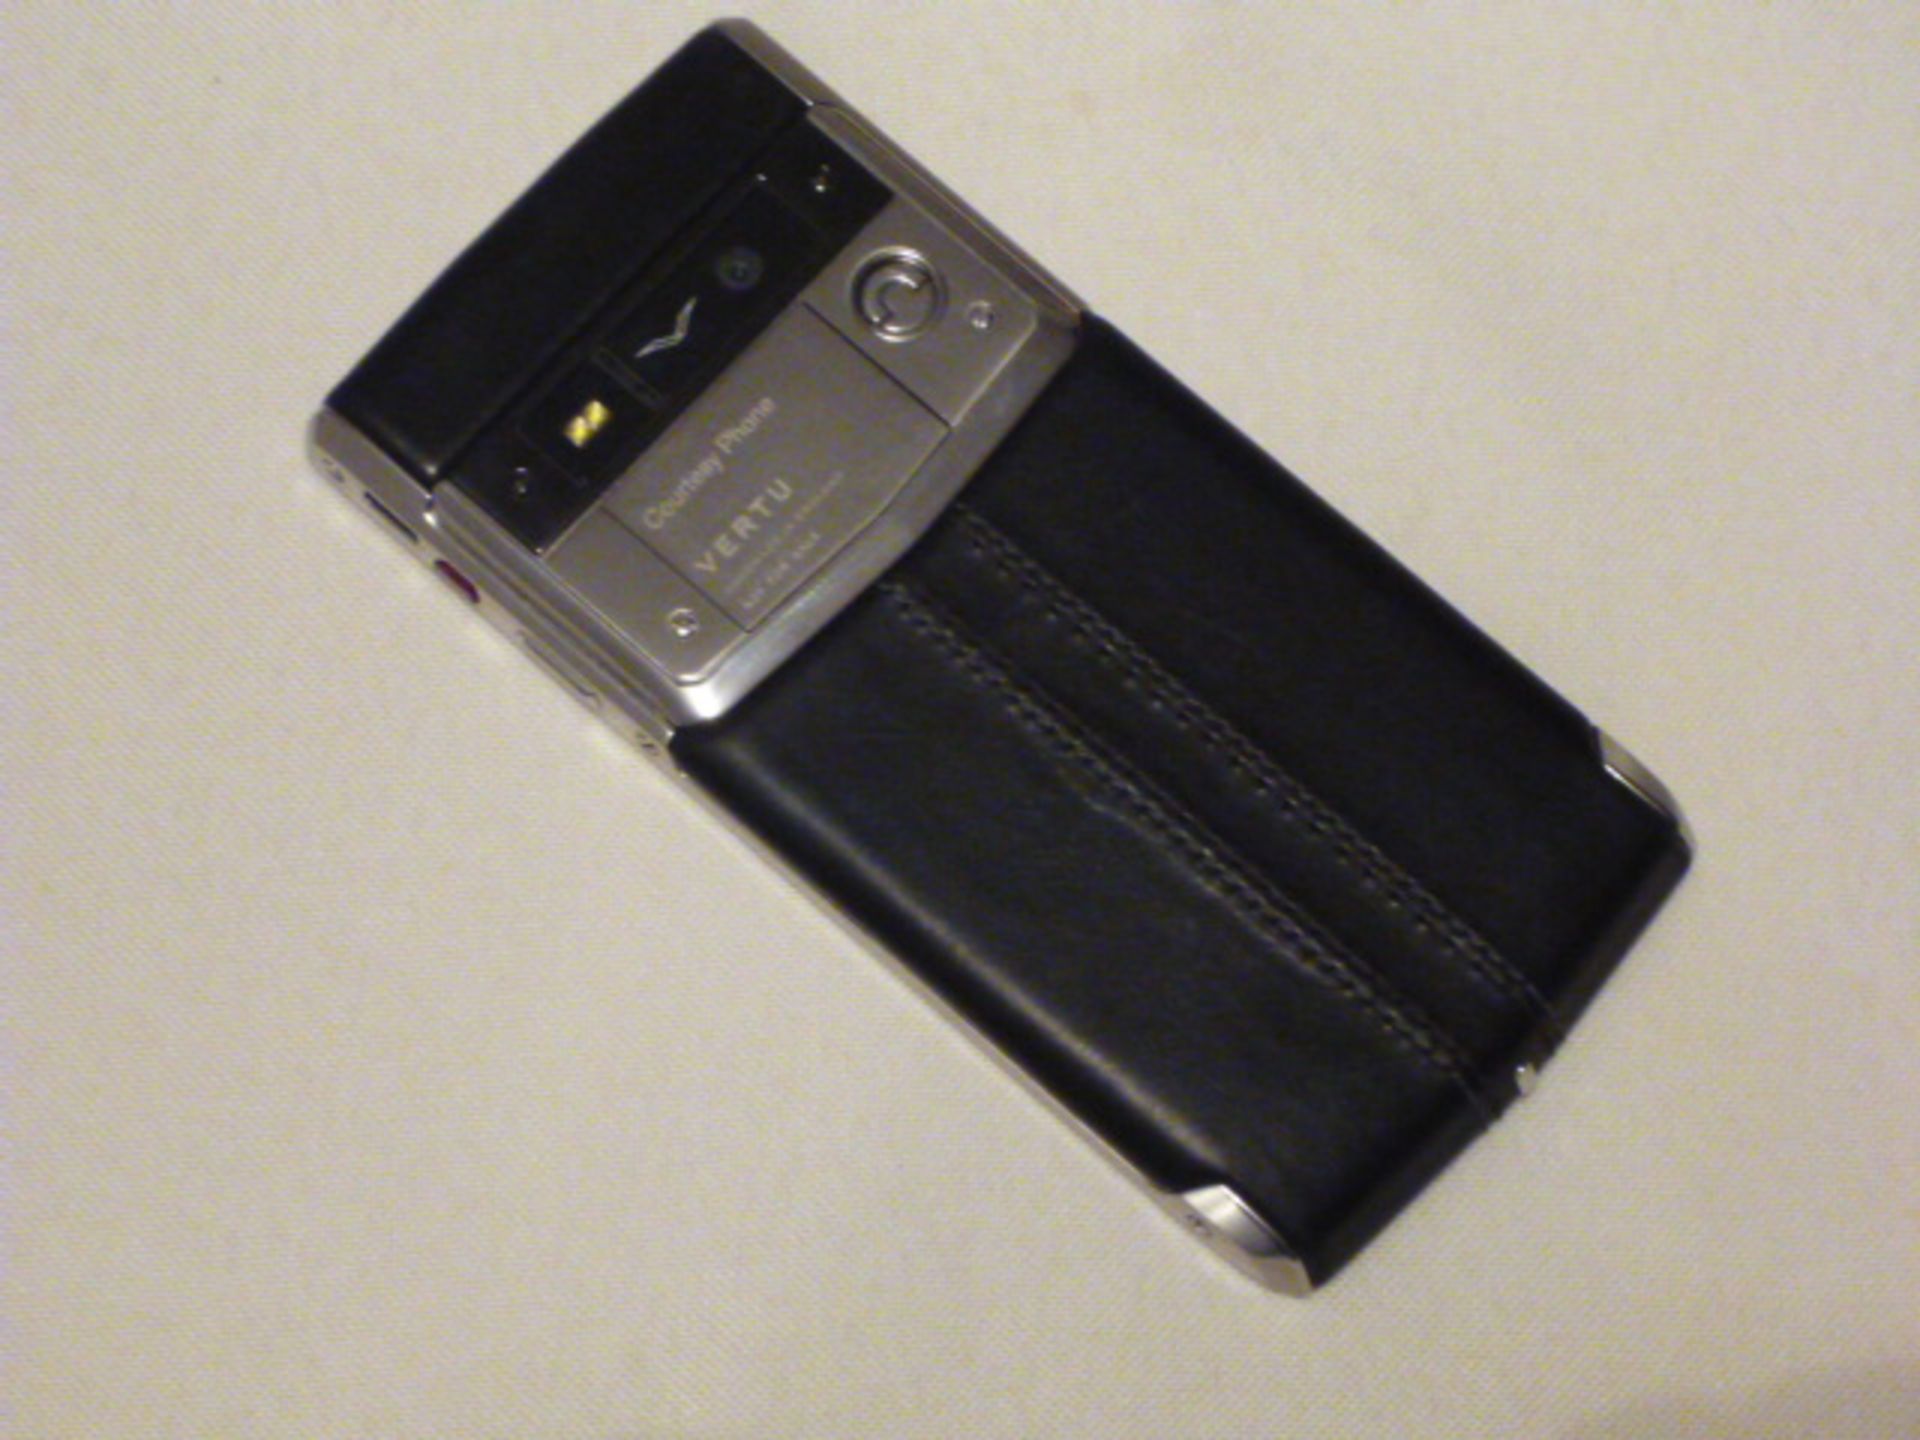 Vertu Signature Touch Jet Calf, Courtesy Phone, S/N E-013126. Tested Working, but without Warranty - Image 2 of 2